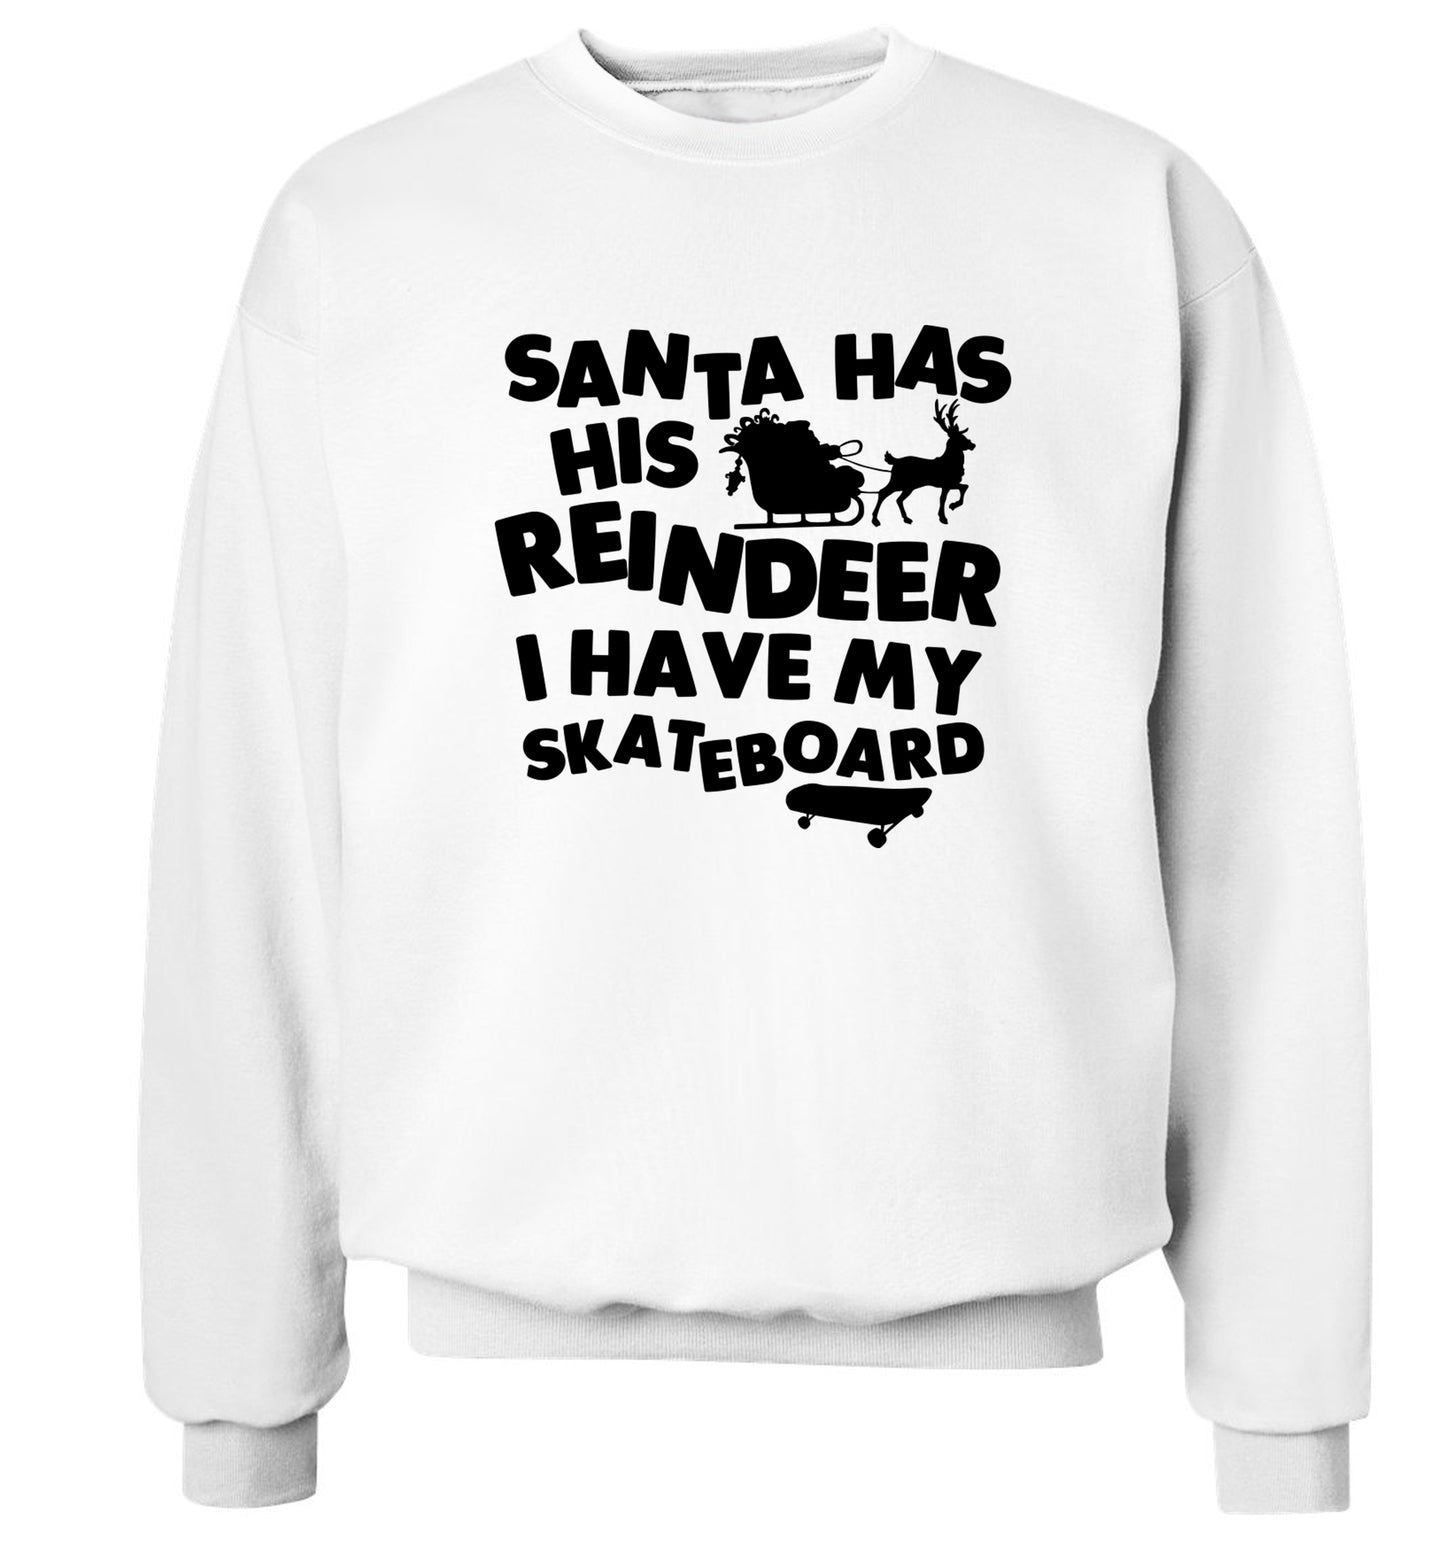 Santa has his reindeer I have my skateboard Adult's unisex white Sweater 2XL